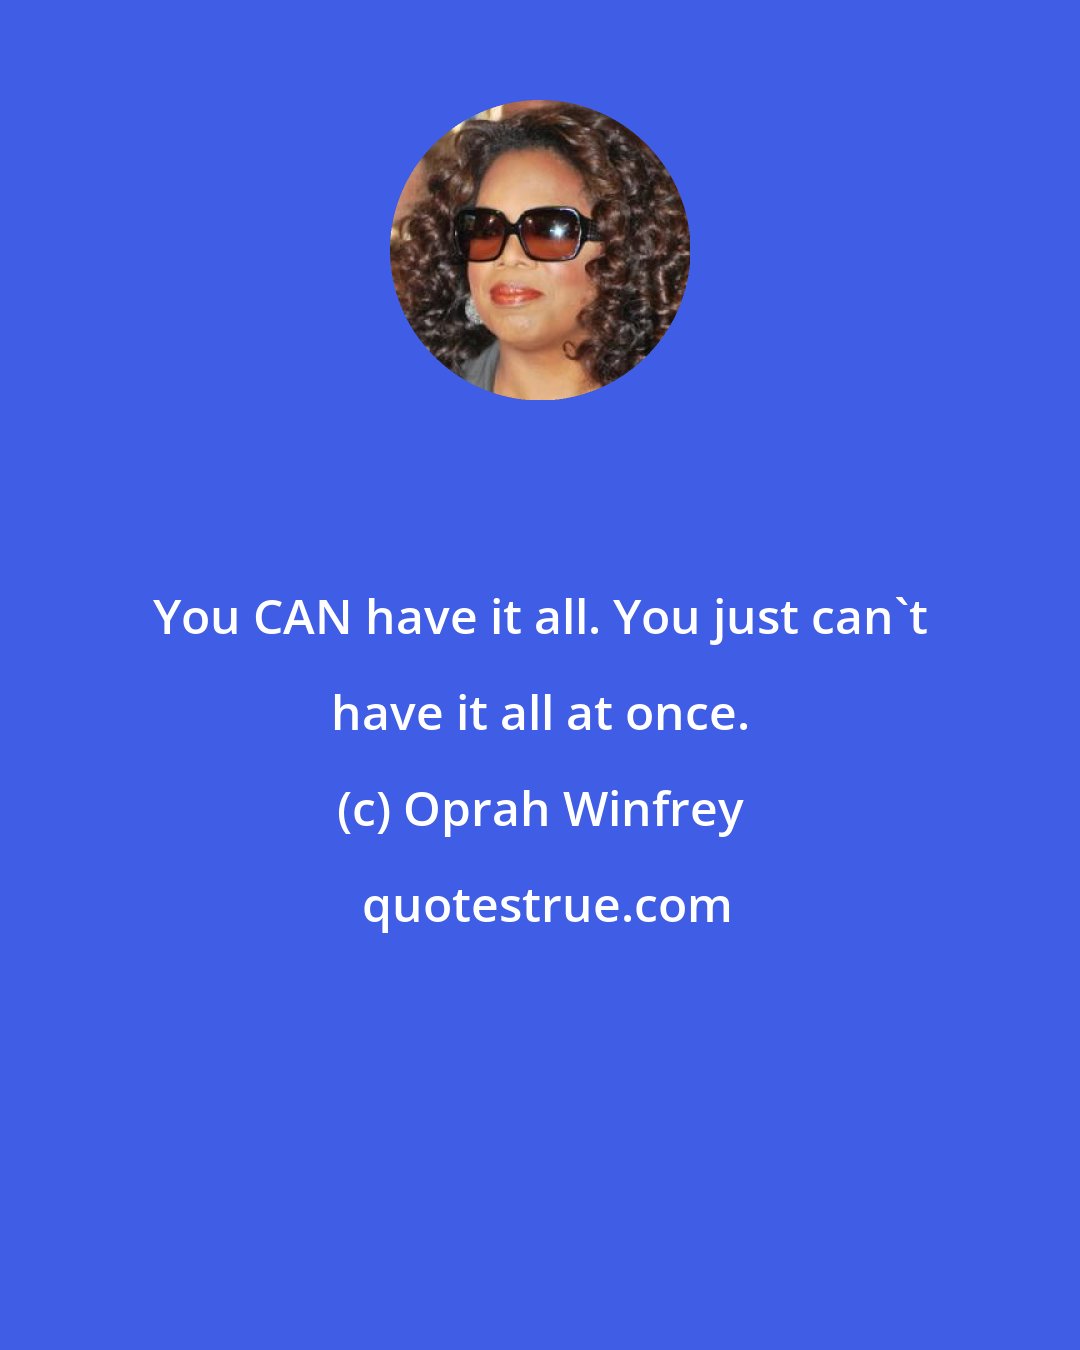 Oprah Winfrey: You CAN have it all. You just can't have it all at once.